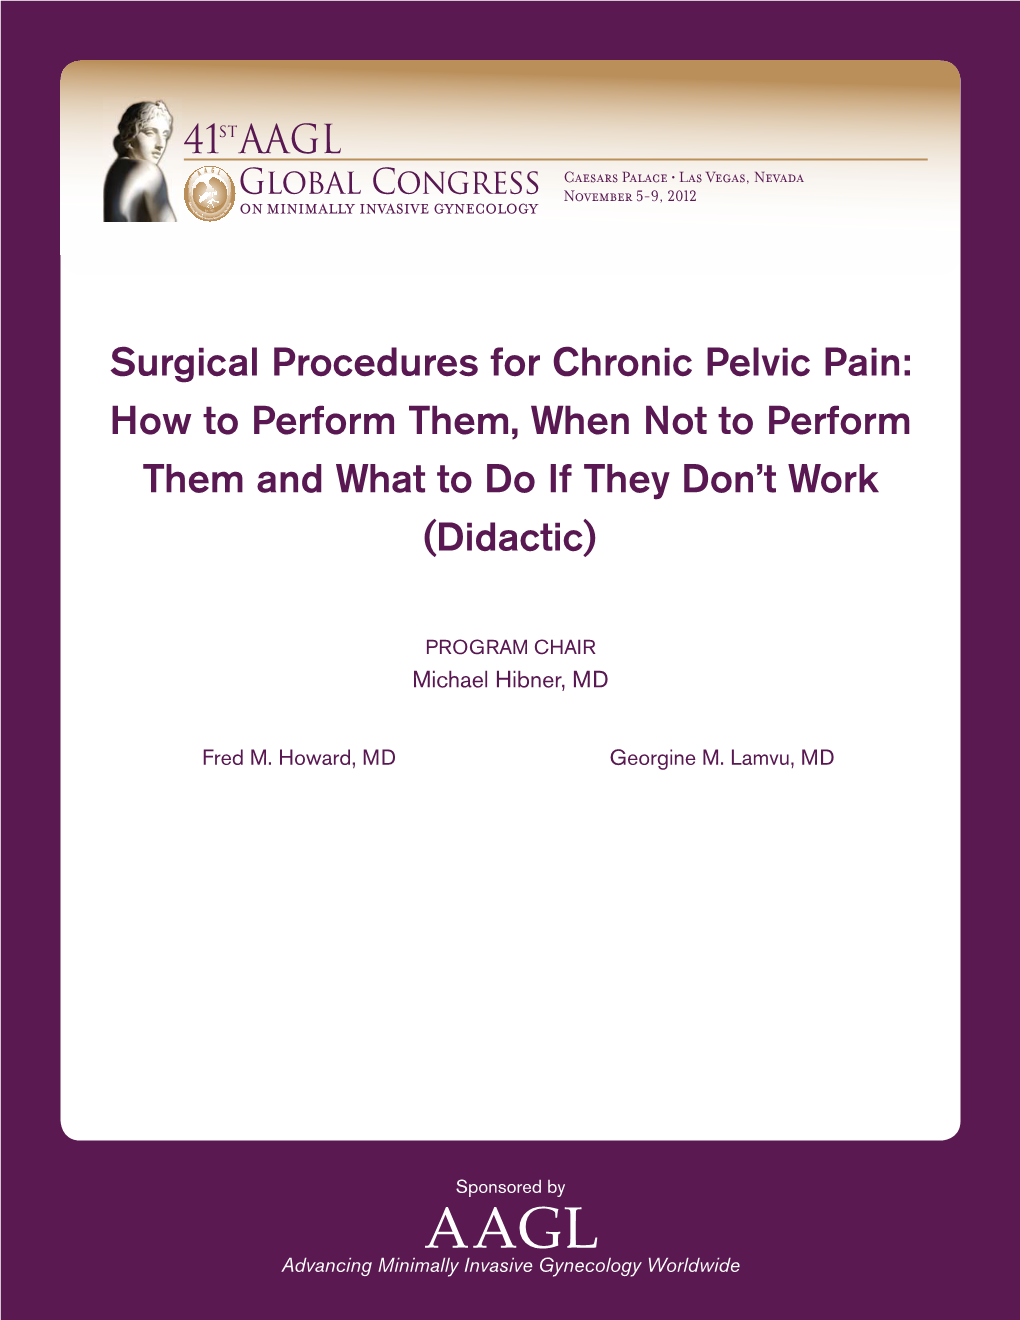 Surgical Procedures for Chronic Pelvic Pain: How to Perform Them, When Not to Perform Them and What to Do If They Don’T Work (Didactic)